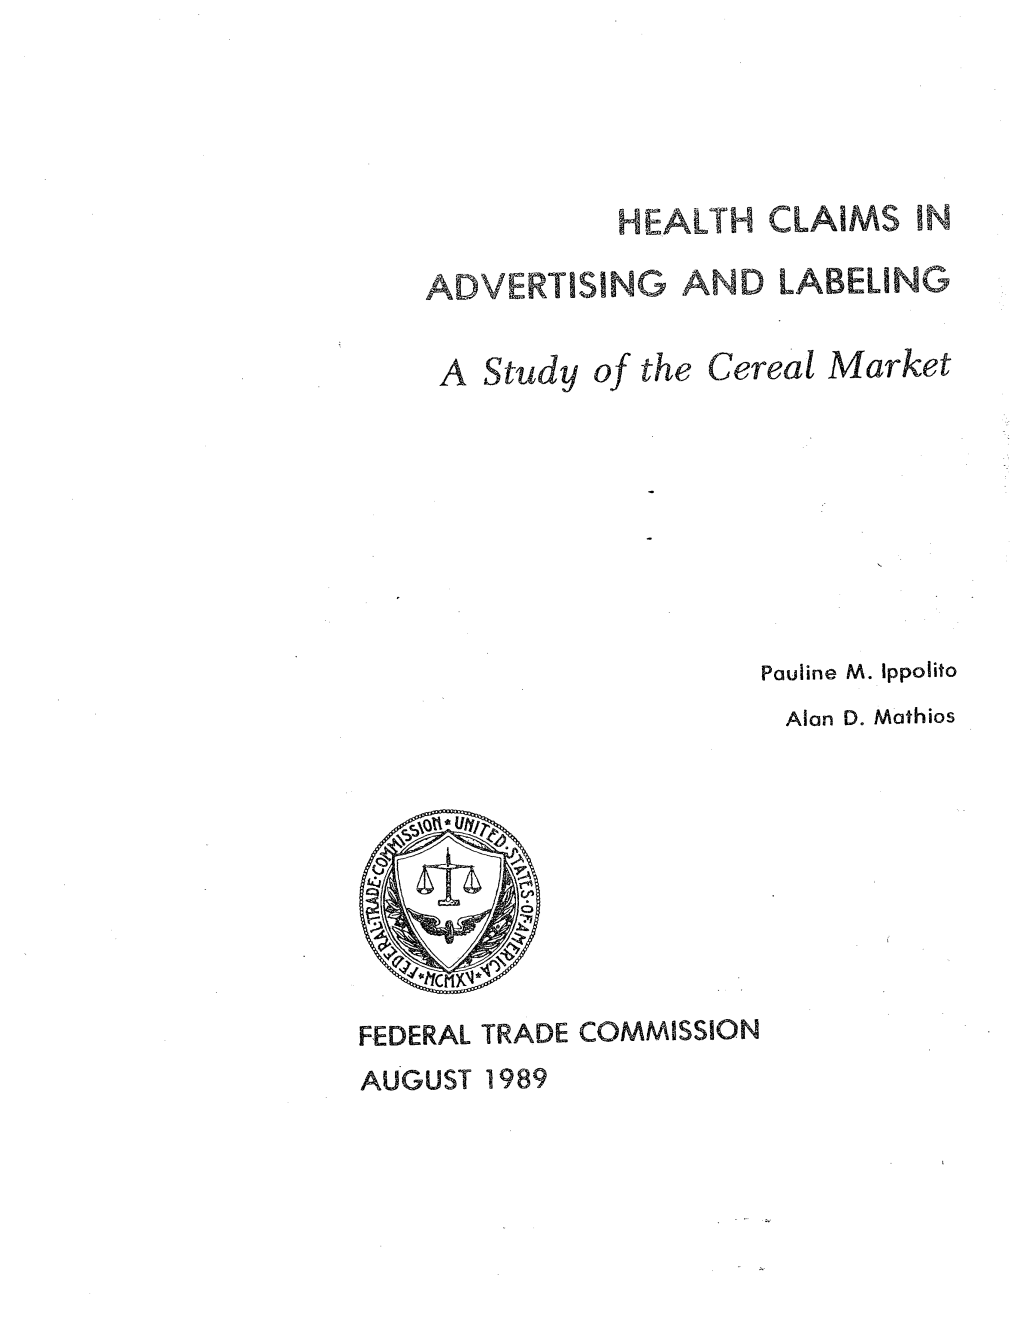 HEALTH CLAIMS in ADVERTISING and LABELING: a Study of the Cereal Market